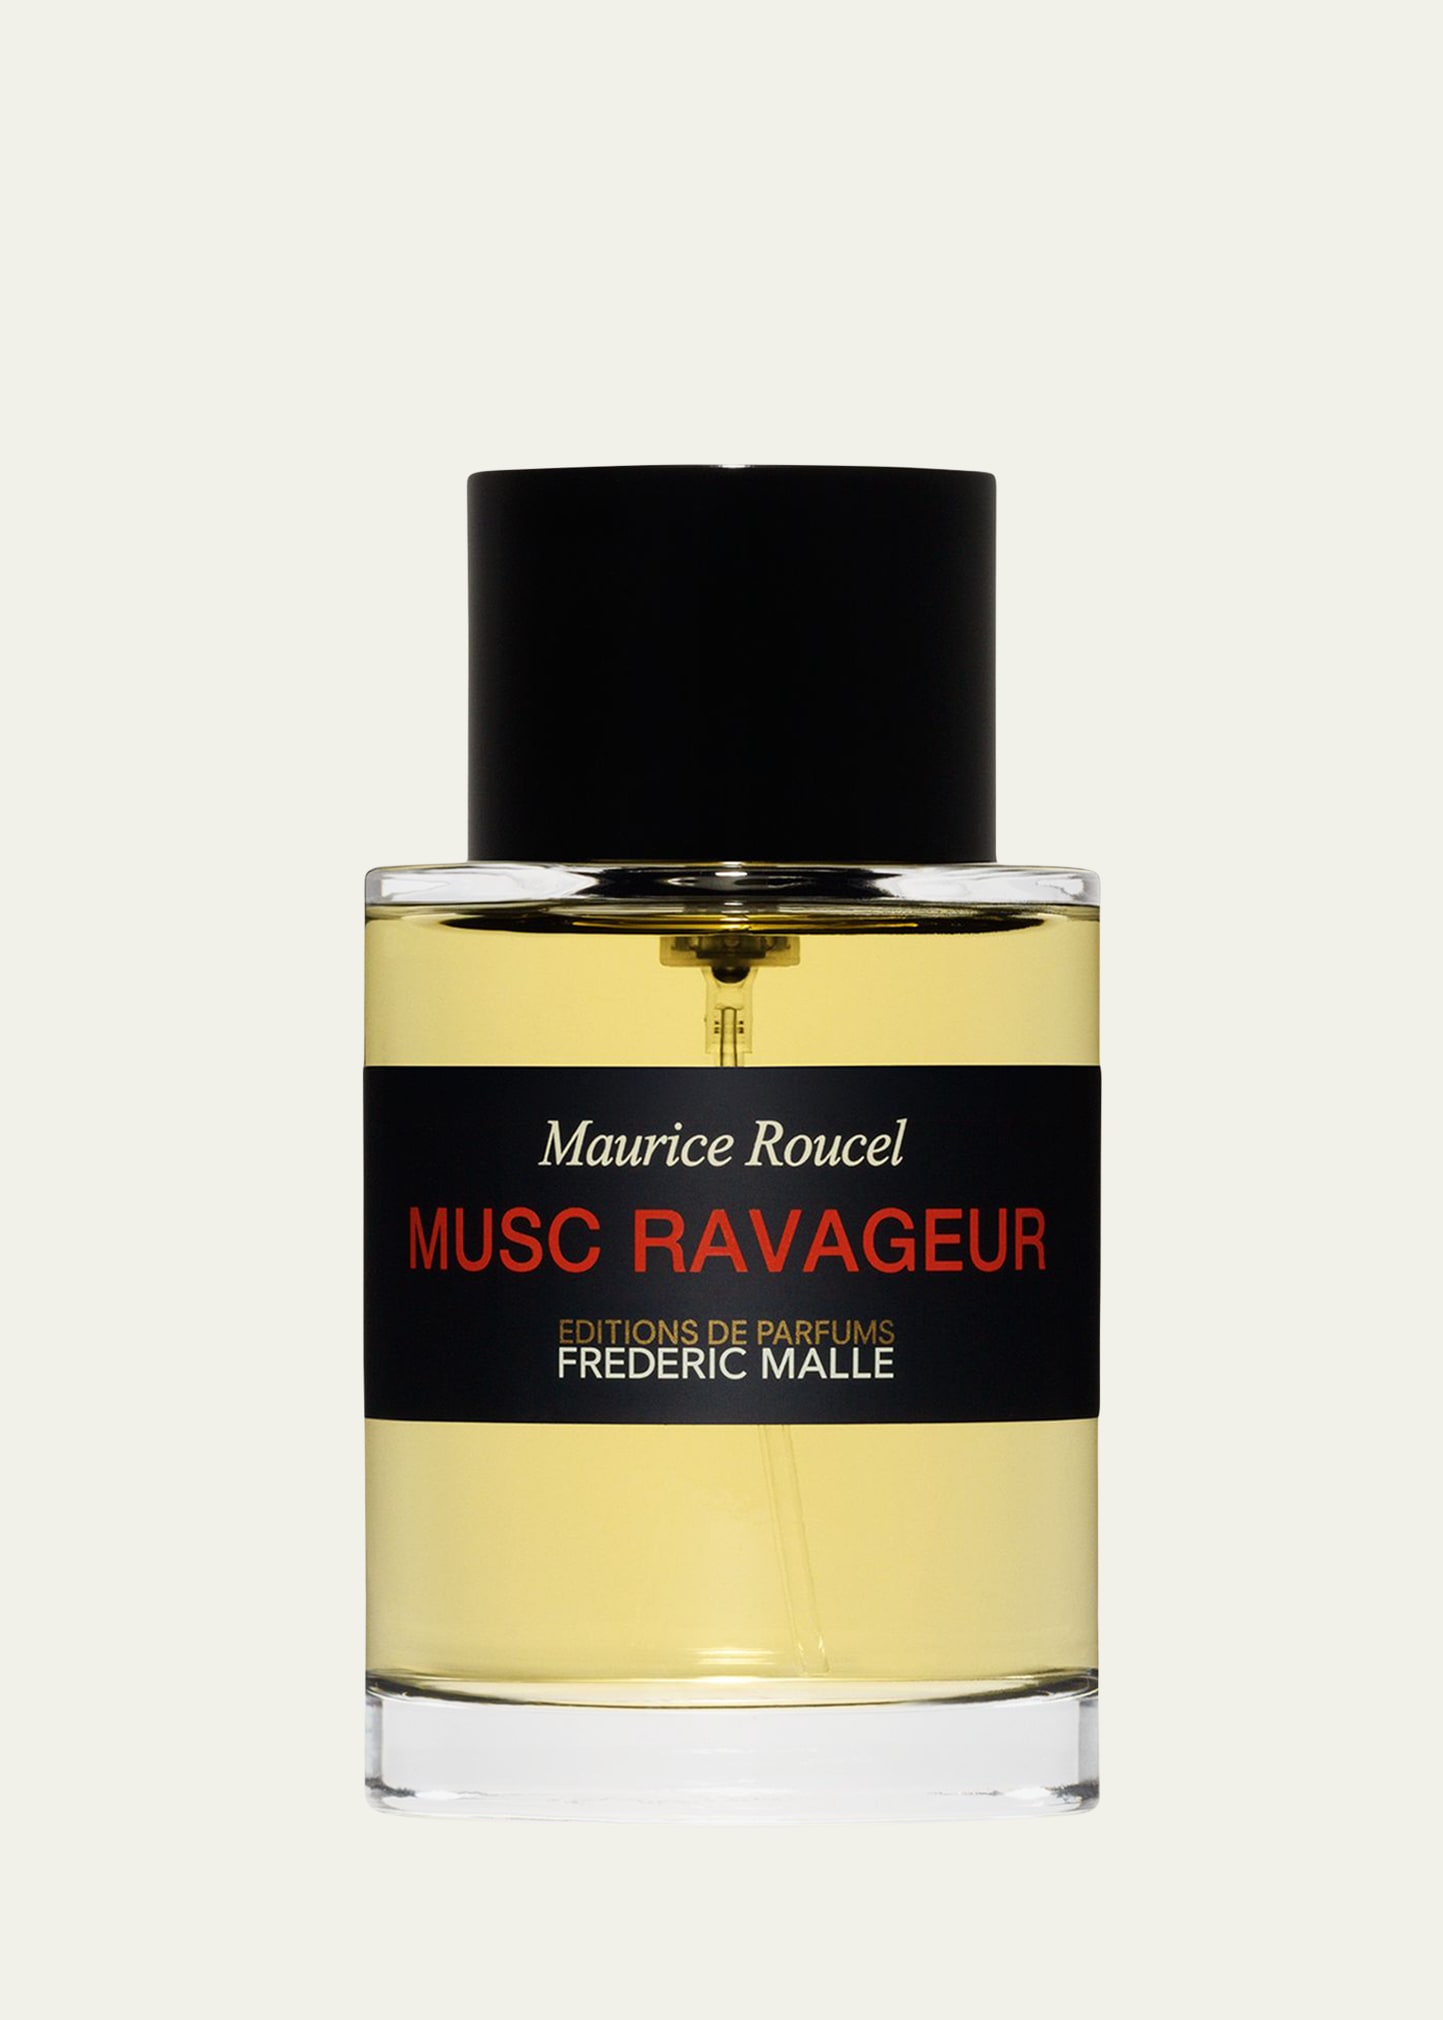 Editions De Parfums Frederic Malle Musc Ravageur Perfume, 3.4 Oz./ 100 ml In White